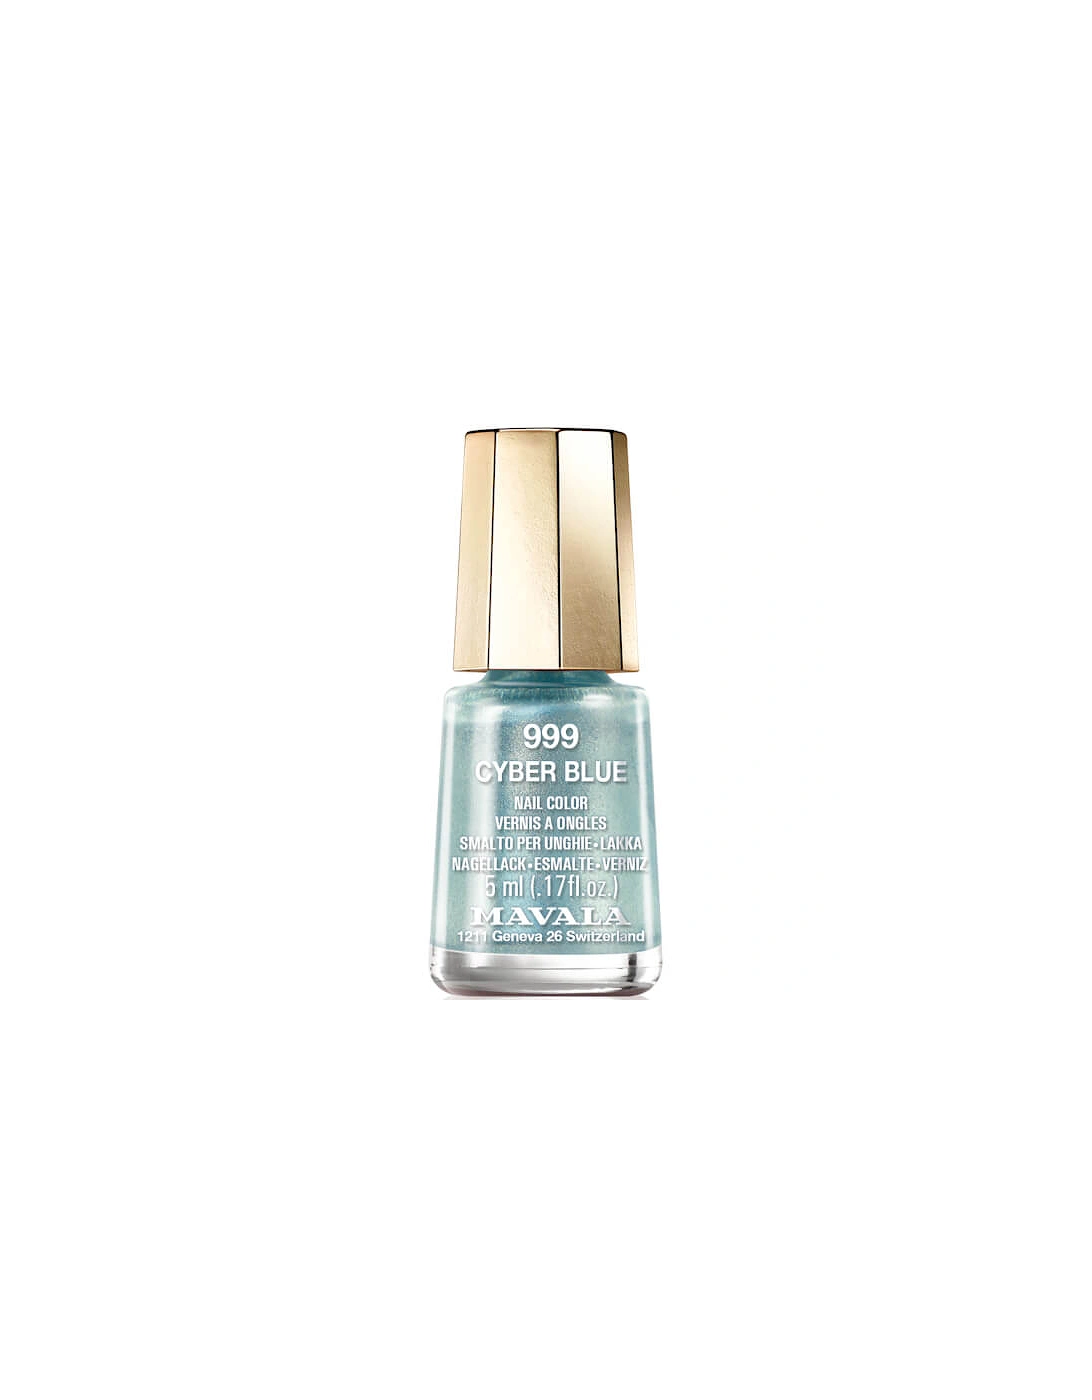 Cyber Chic Mini Colour Nail Varnish - Cyber Blue, 2 of 1